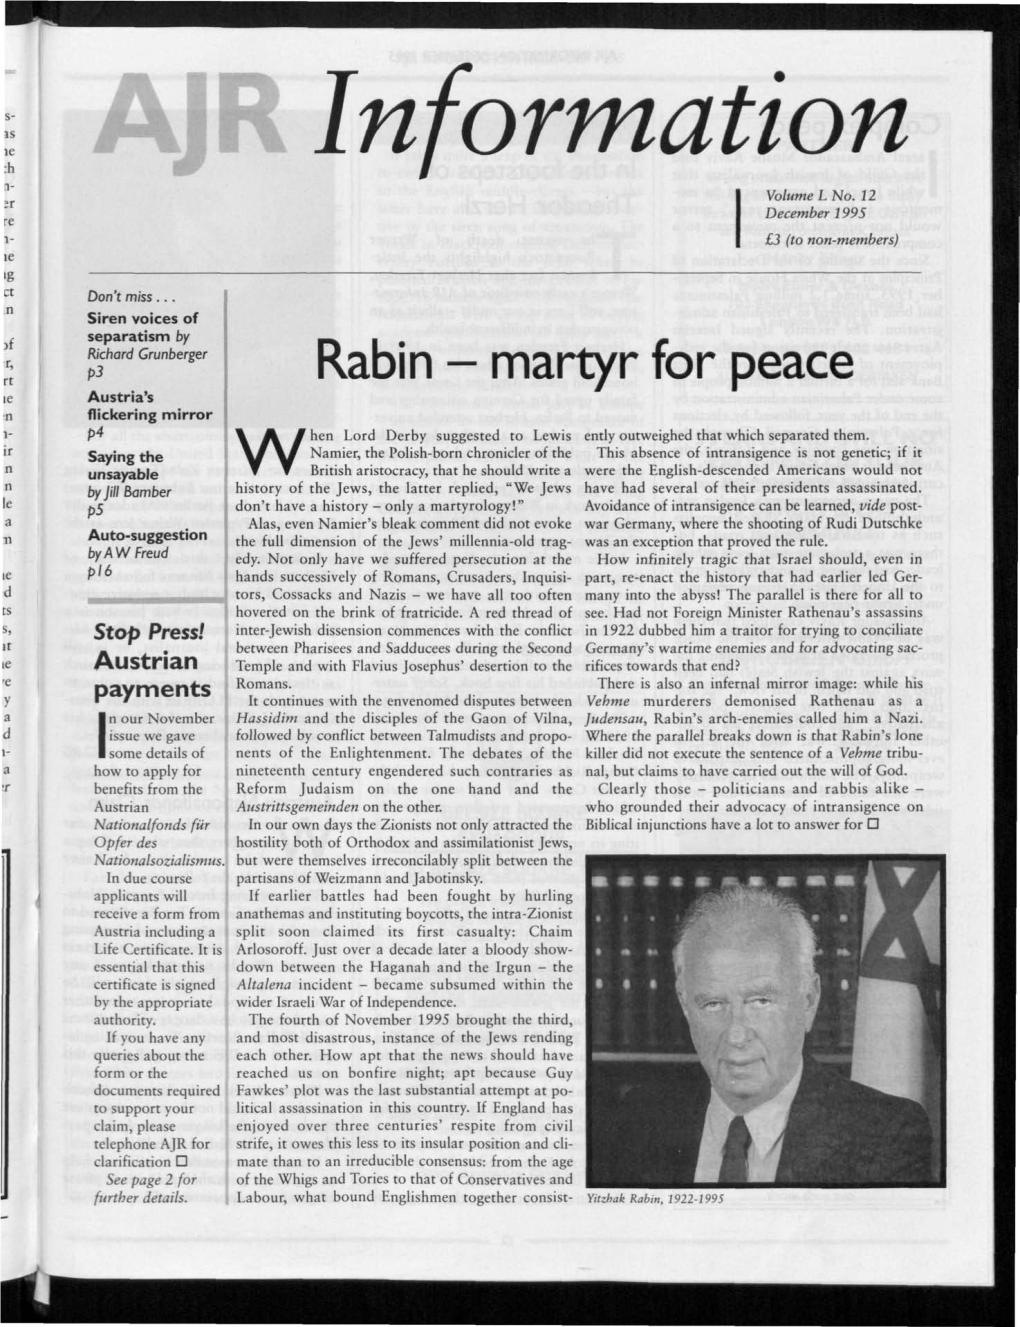 Rabin - Martyr for Peace Austria's Flickering Mirror P4 Hen Lord Derby Suggested to Lewis Ently Outweighed That Which Separated Them